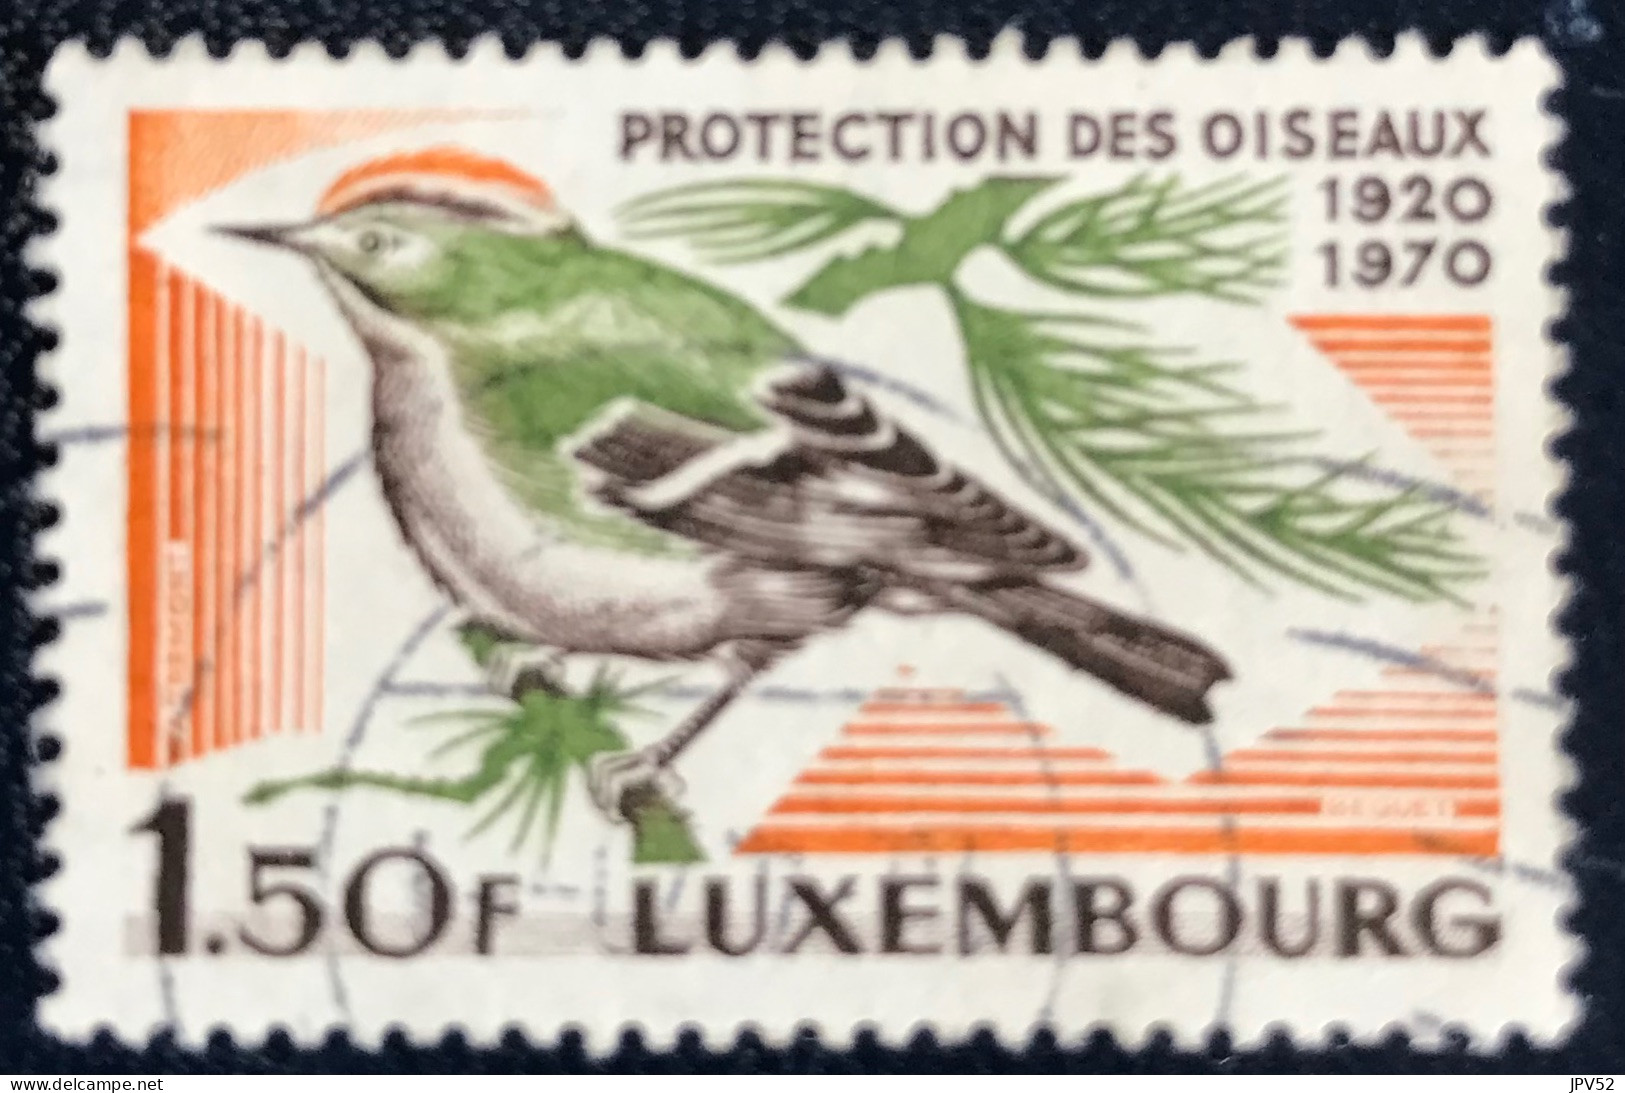 Luxembourg - Luxemburg - C18/32 - 1970 - (°)used - Michel 806 - Vuurgoudhaan - Used Stamps